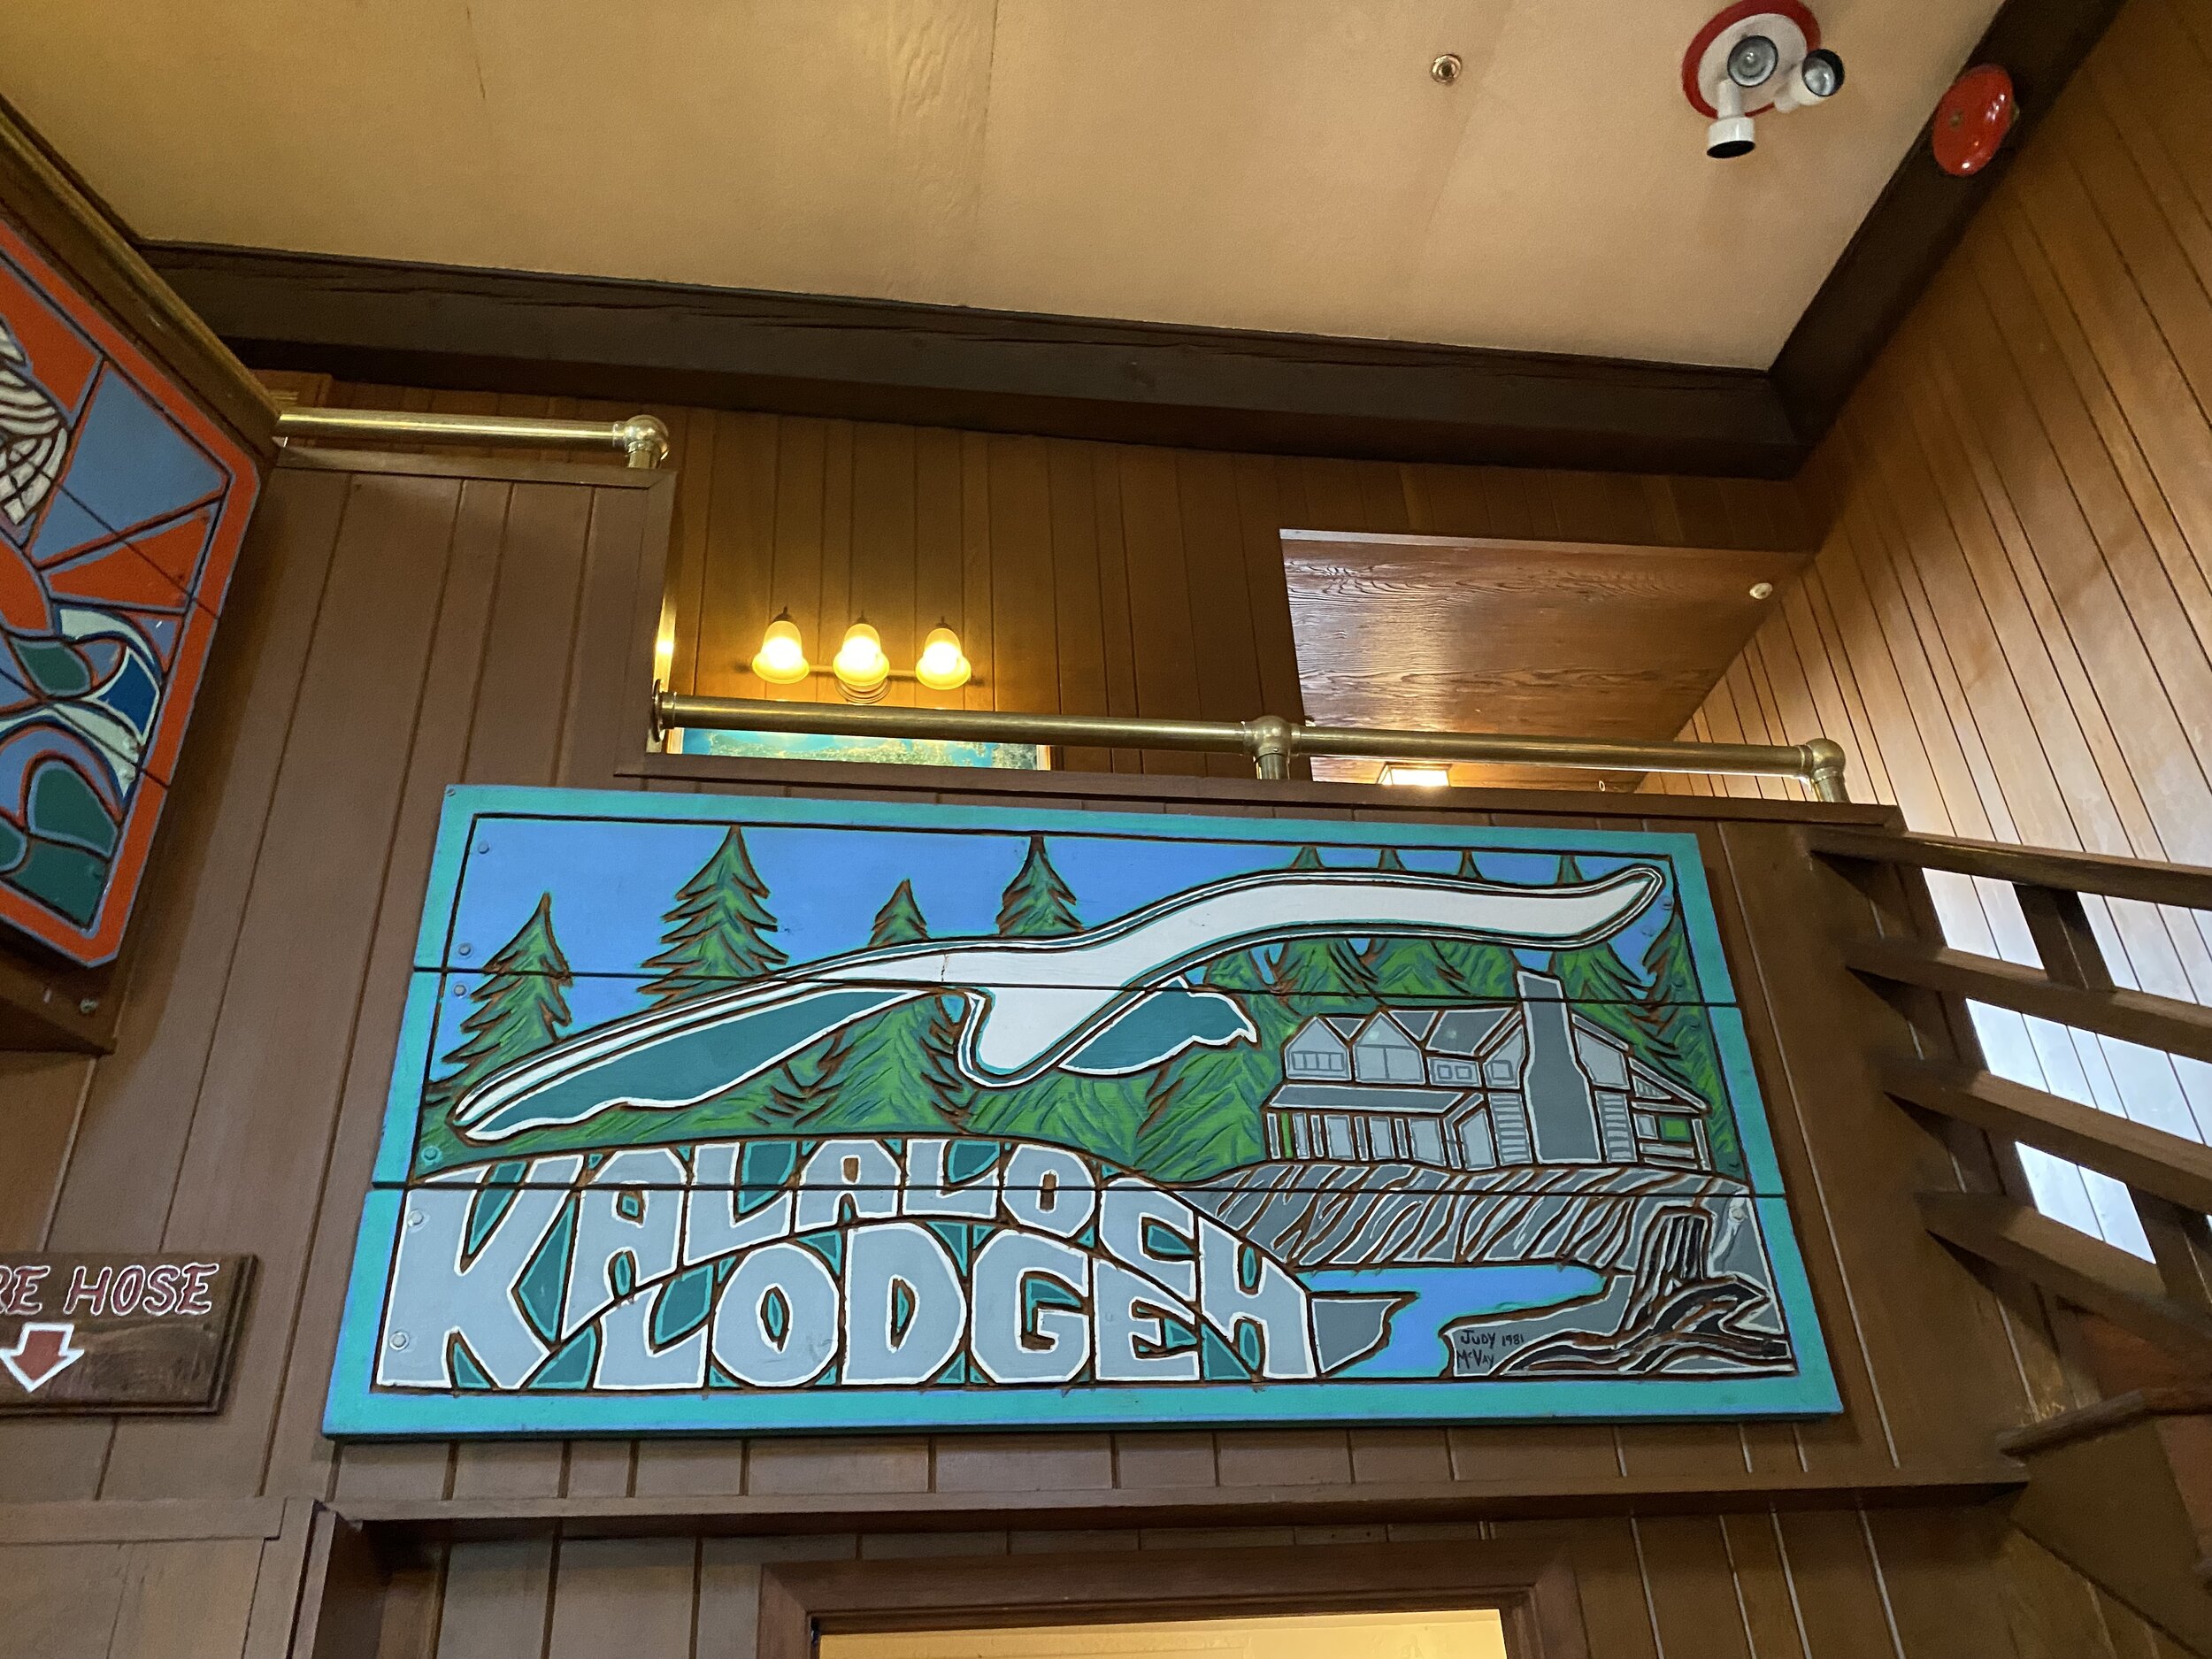 One of the beautiful mosaic signs in the lobby of Kalaloch Lodge.  Photo by Karen Boudreaux, June 17, 2021